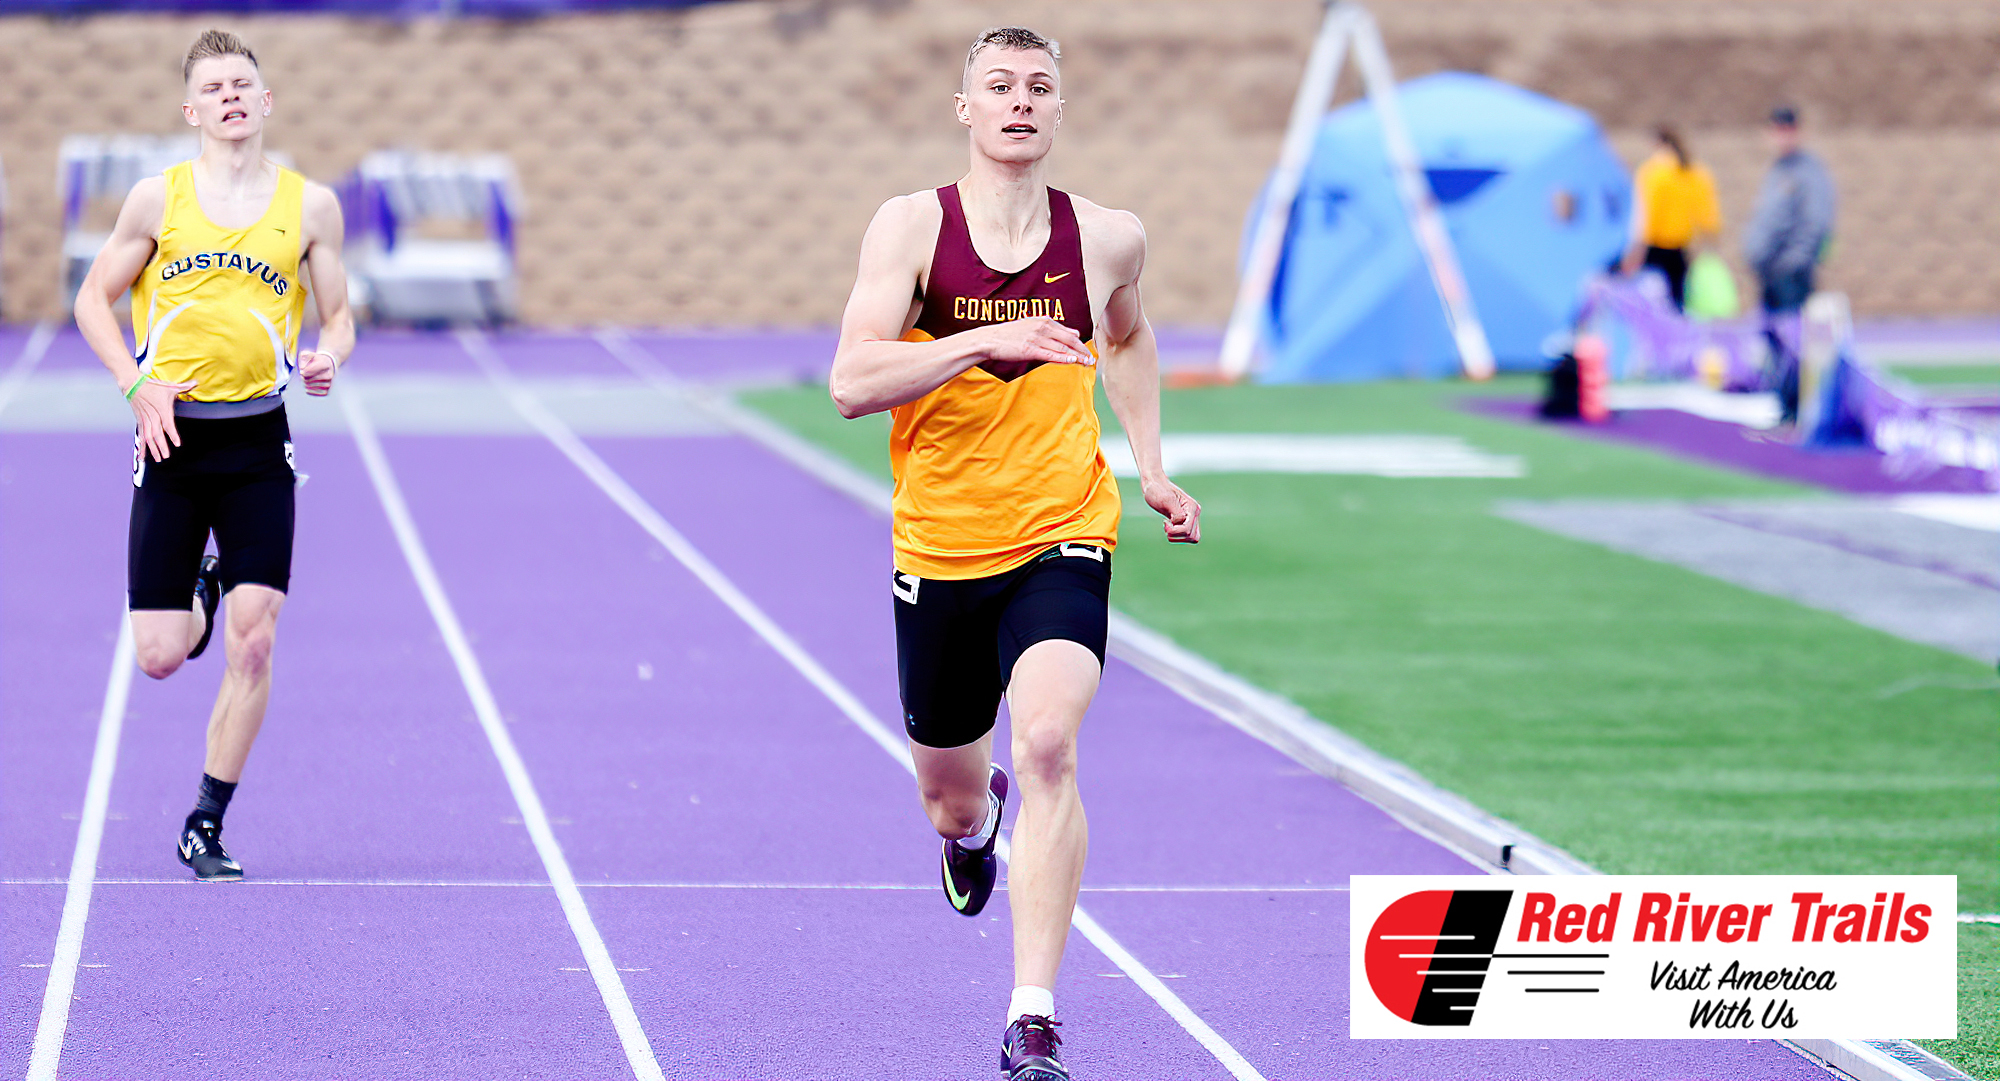 Junior Cal Wright won the 400 meters at the SJU Last-Minute Meet and posted the second fastest time in school history.